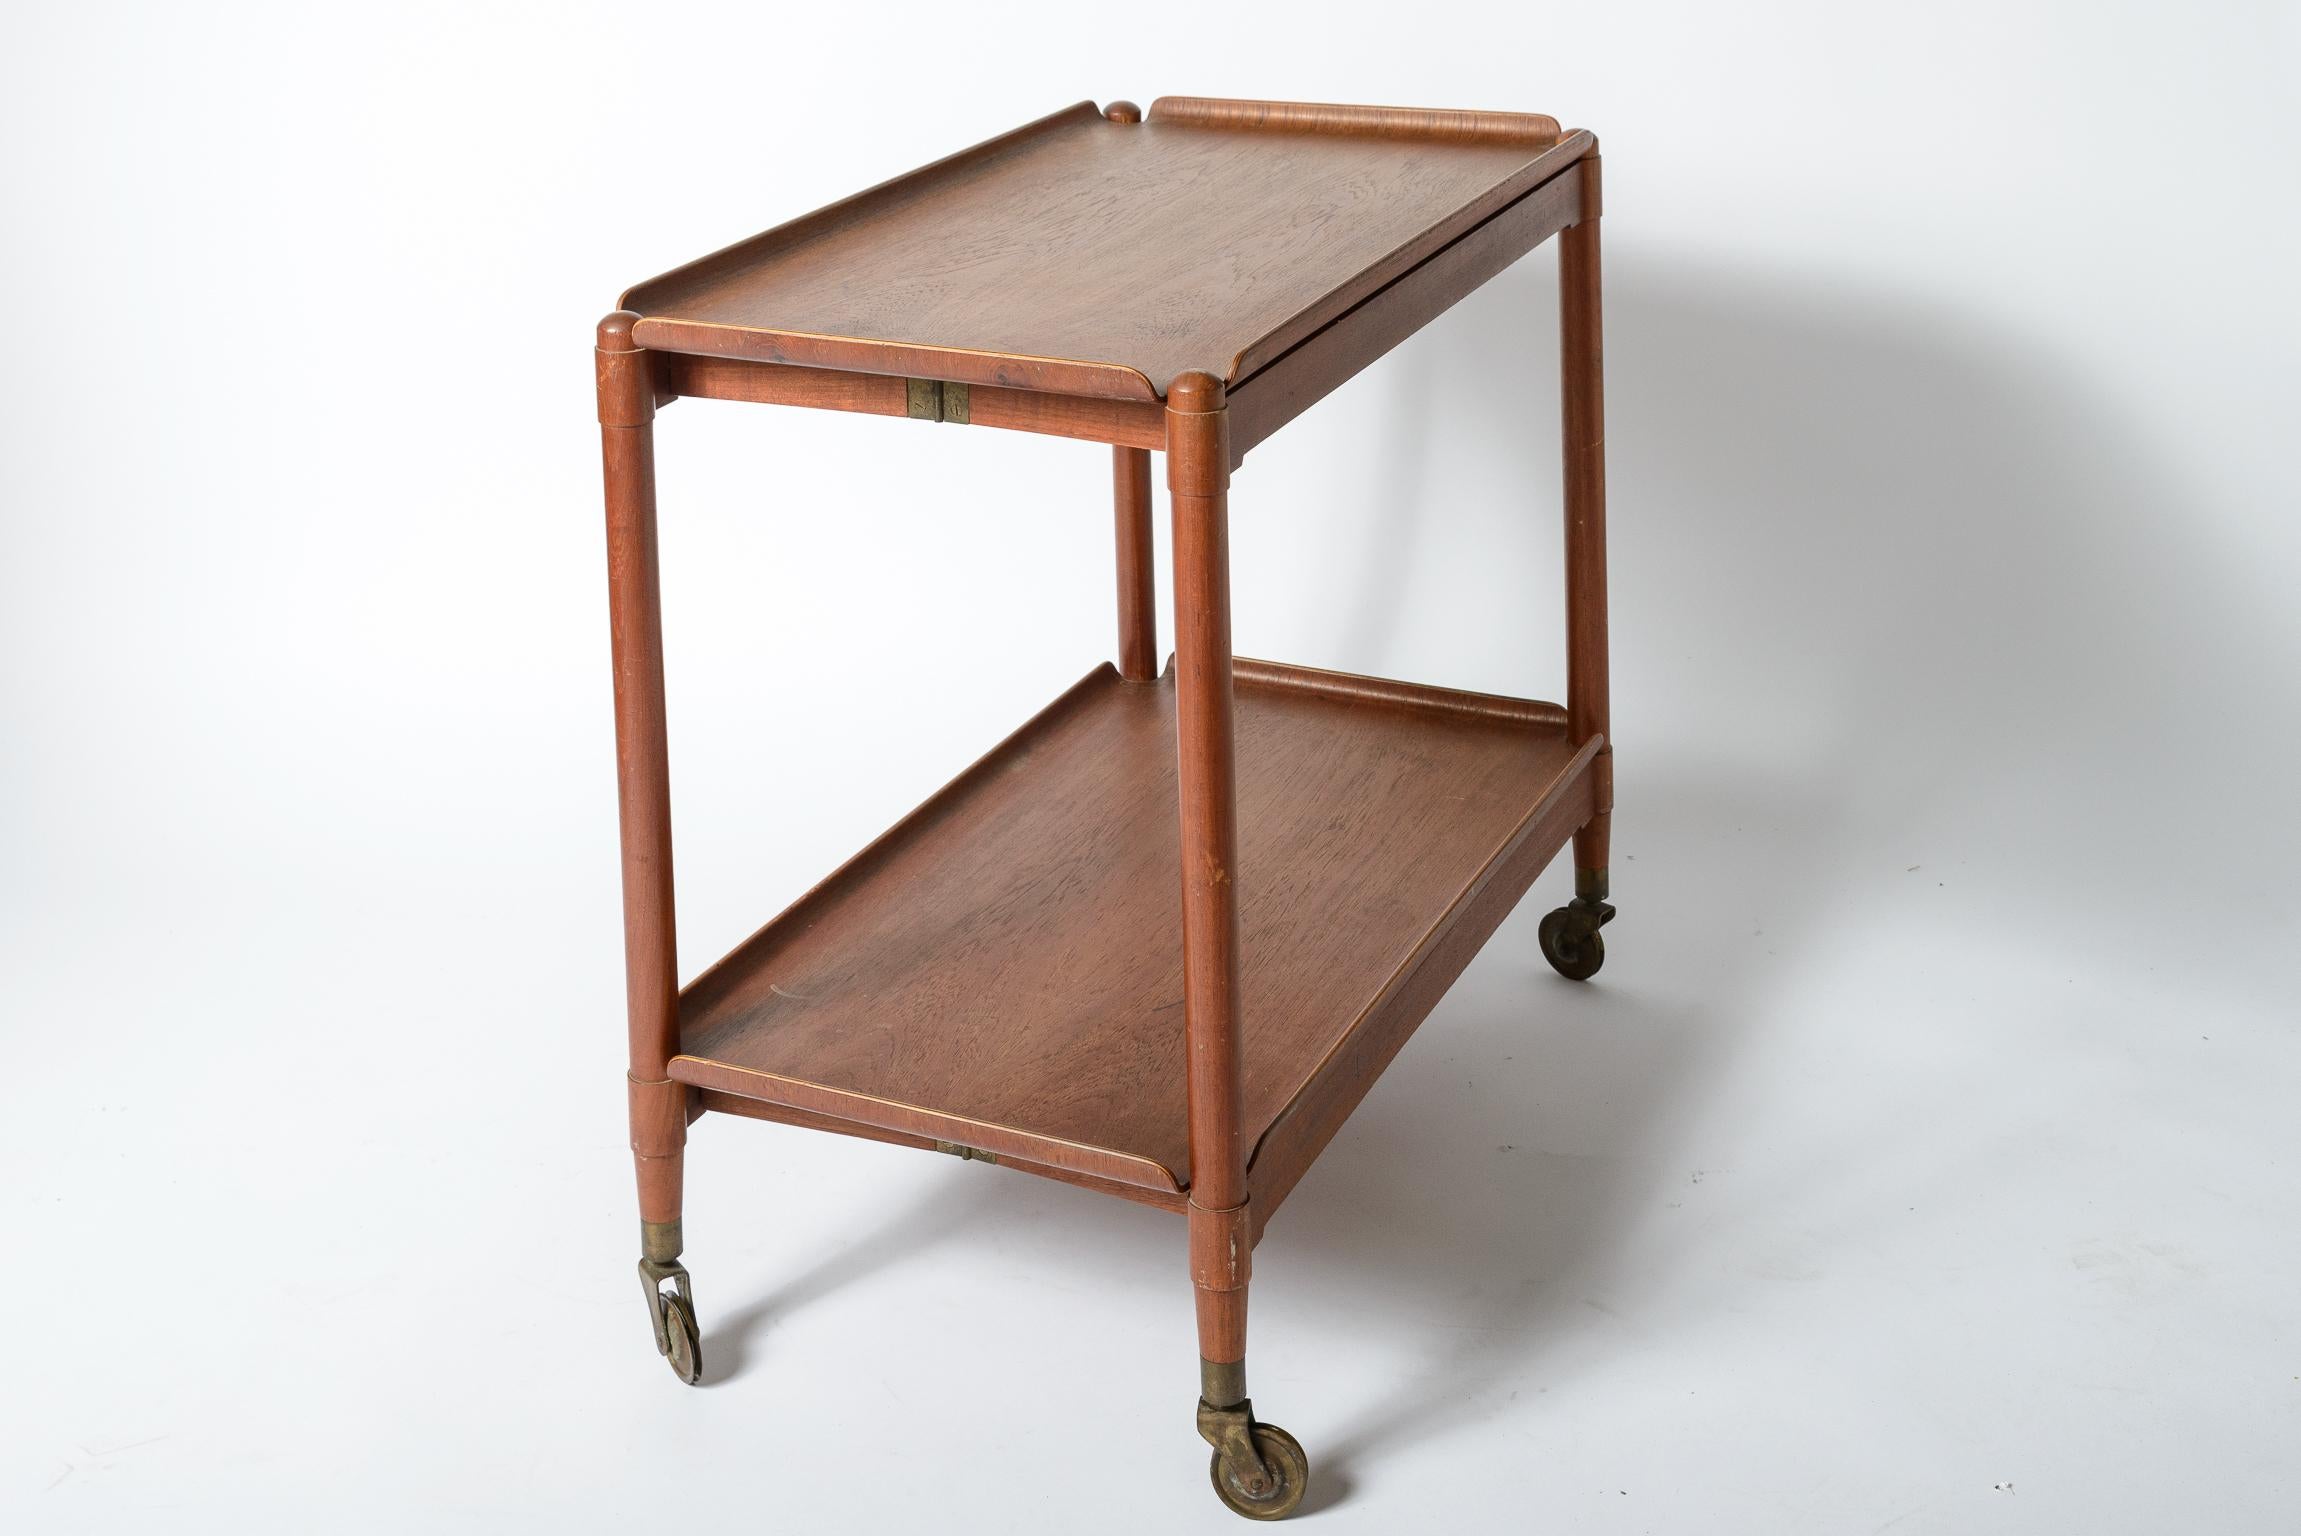 Danish Teak Folding Tray Table
Removable Plywood Trays and folding Structure